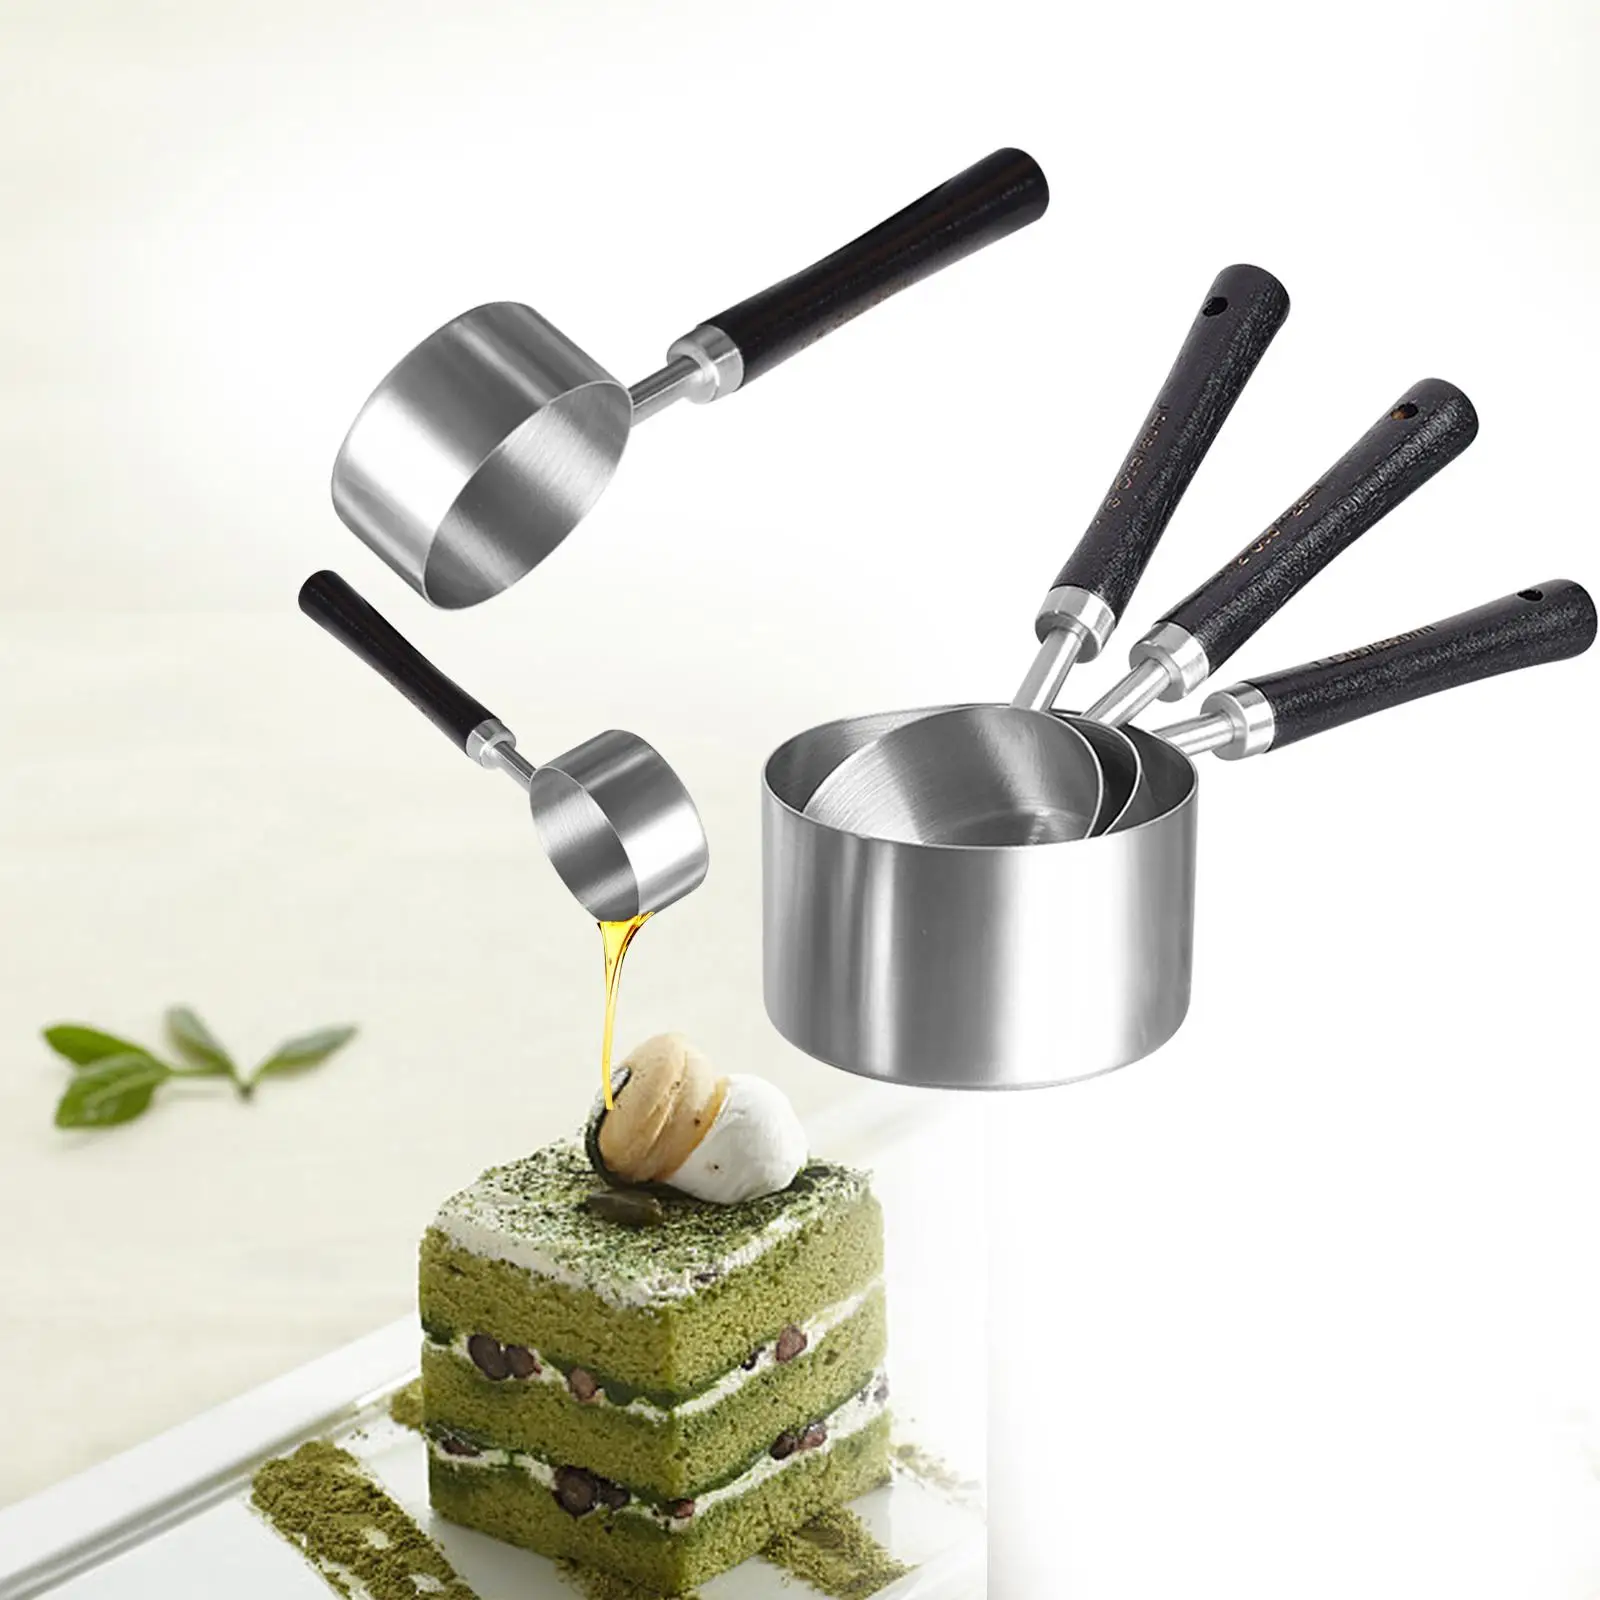 4x Measuring Tools Measuring Cups Set Stainless Steel for food Syrups